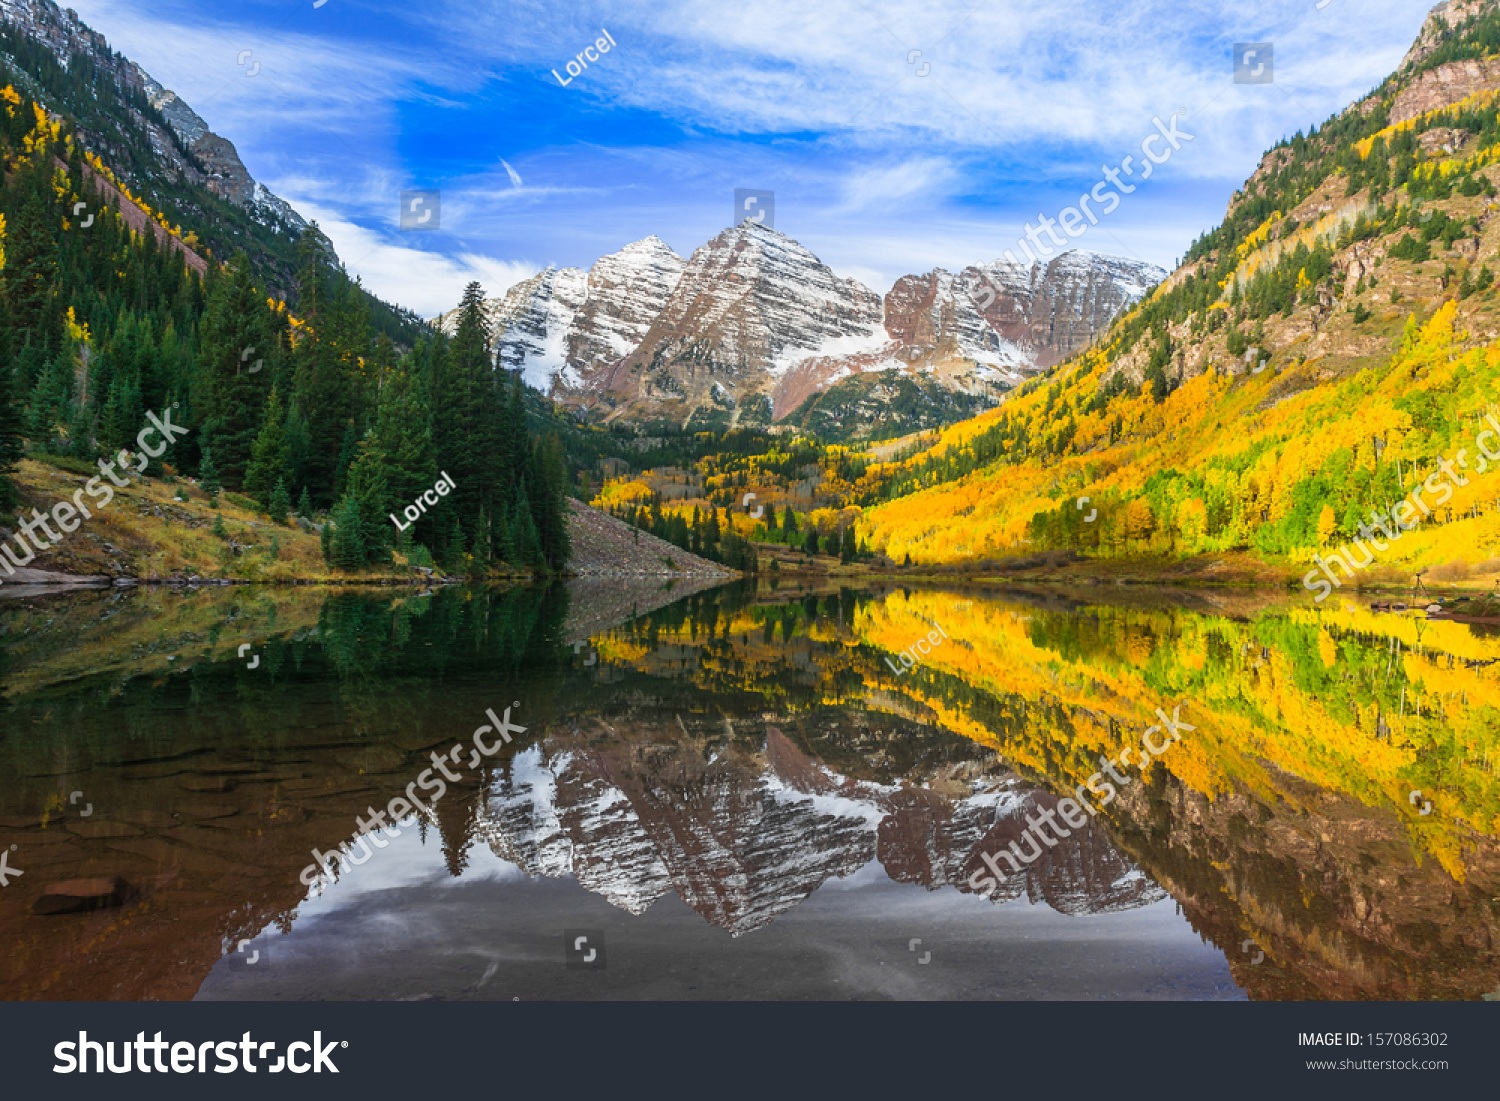 Maroon Bells And Its Reflection In Maroon Lake As Fall Foliage In Peak ...